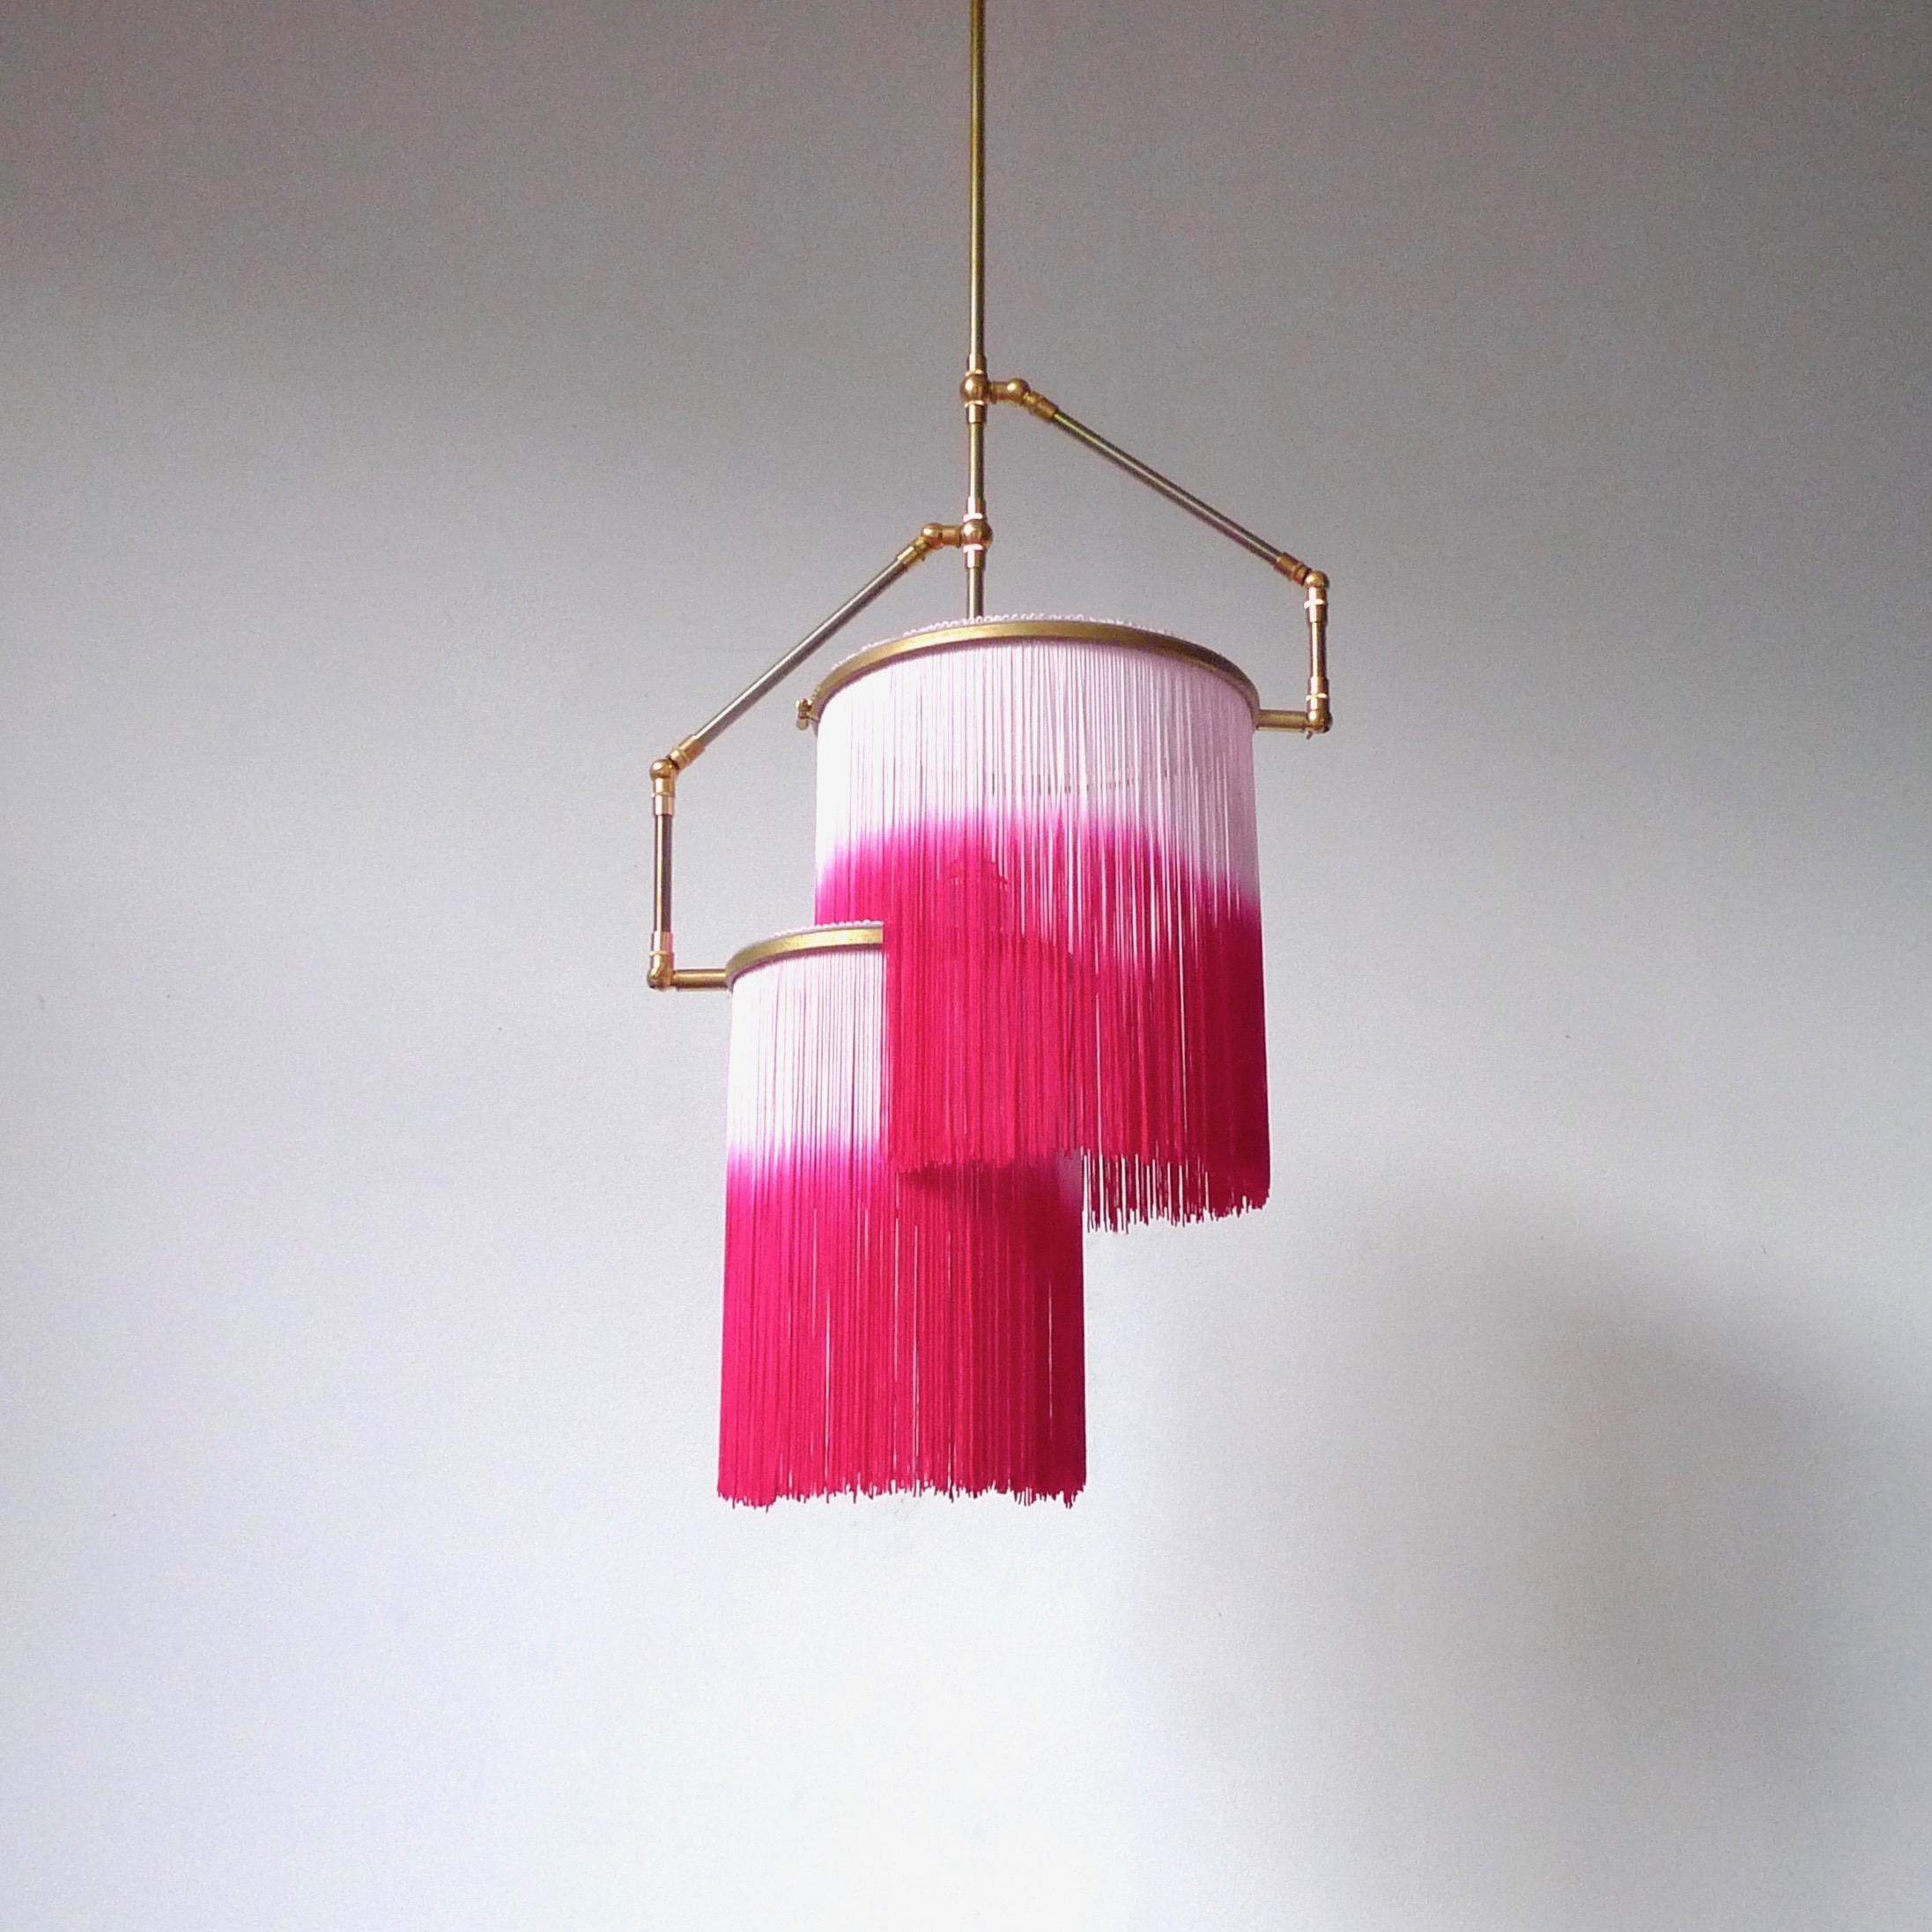 Pink Charme pendant lamp, Sander Bottinga

Dimensions: H 45 (can be customized) x W 38 x D 25 cm
Hand-sculpted in brass, leather, wood and dip dyed colored fringes in viscose.
The movable arms makes it possible to move the circles with fringes in